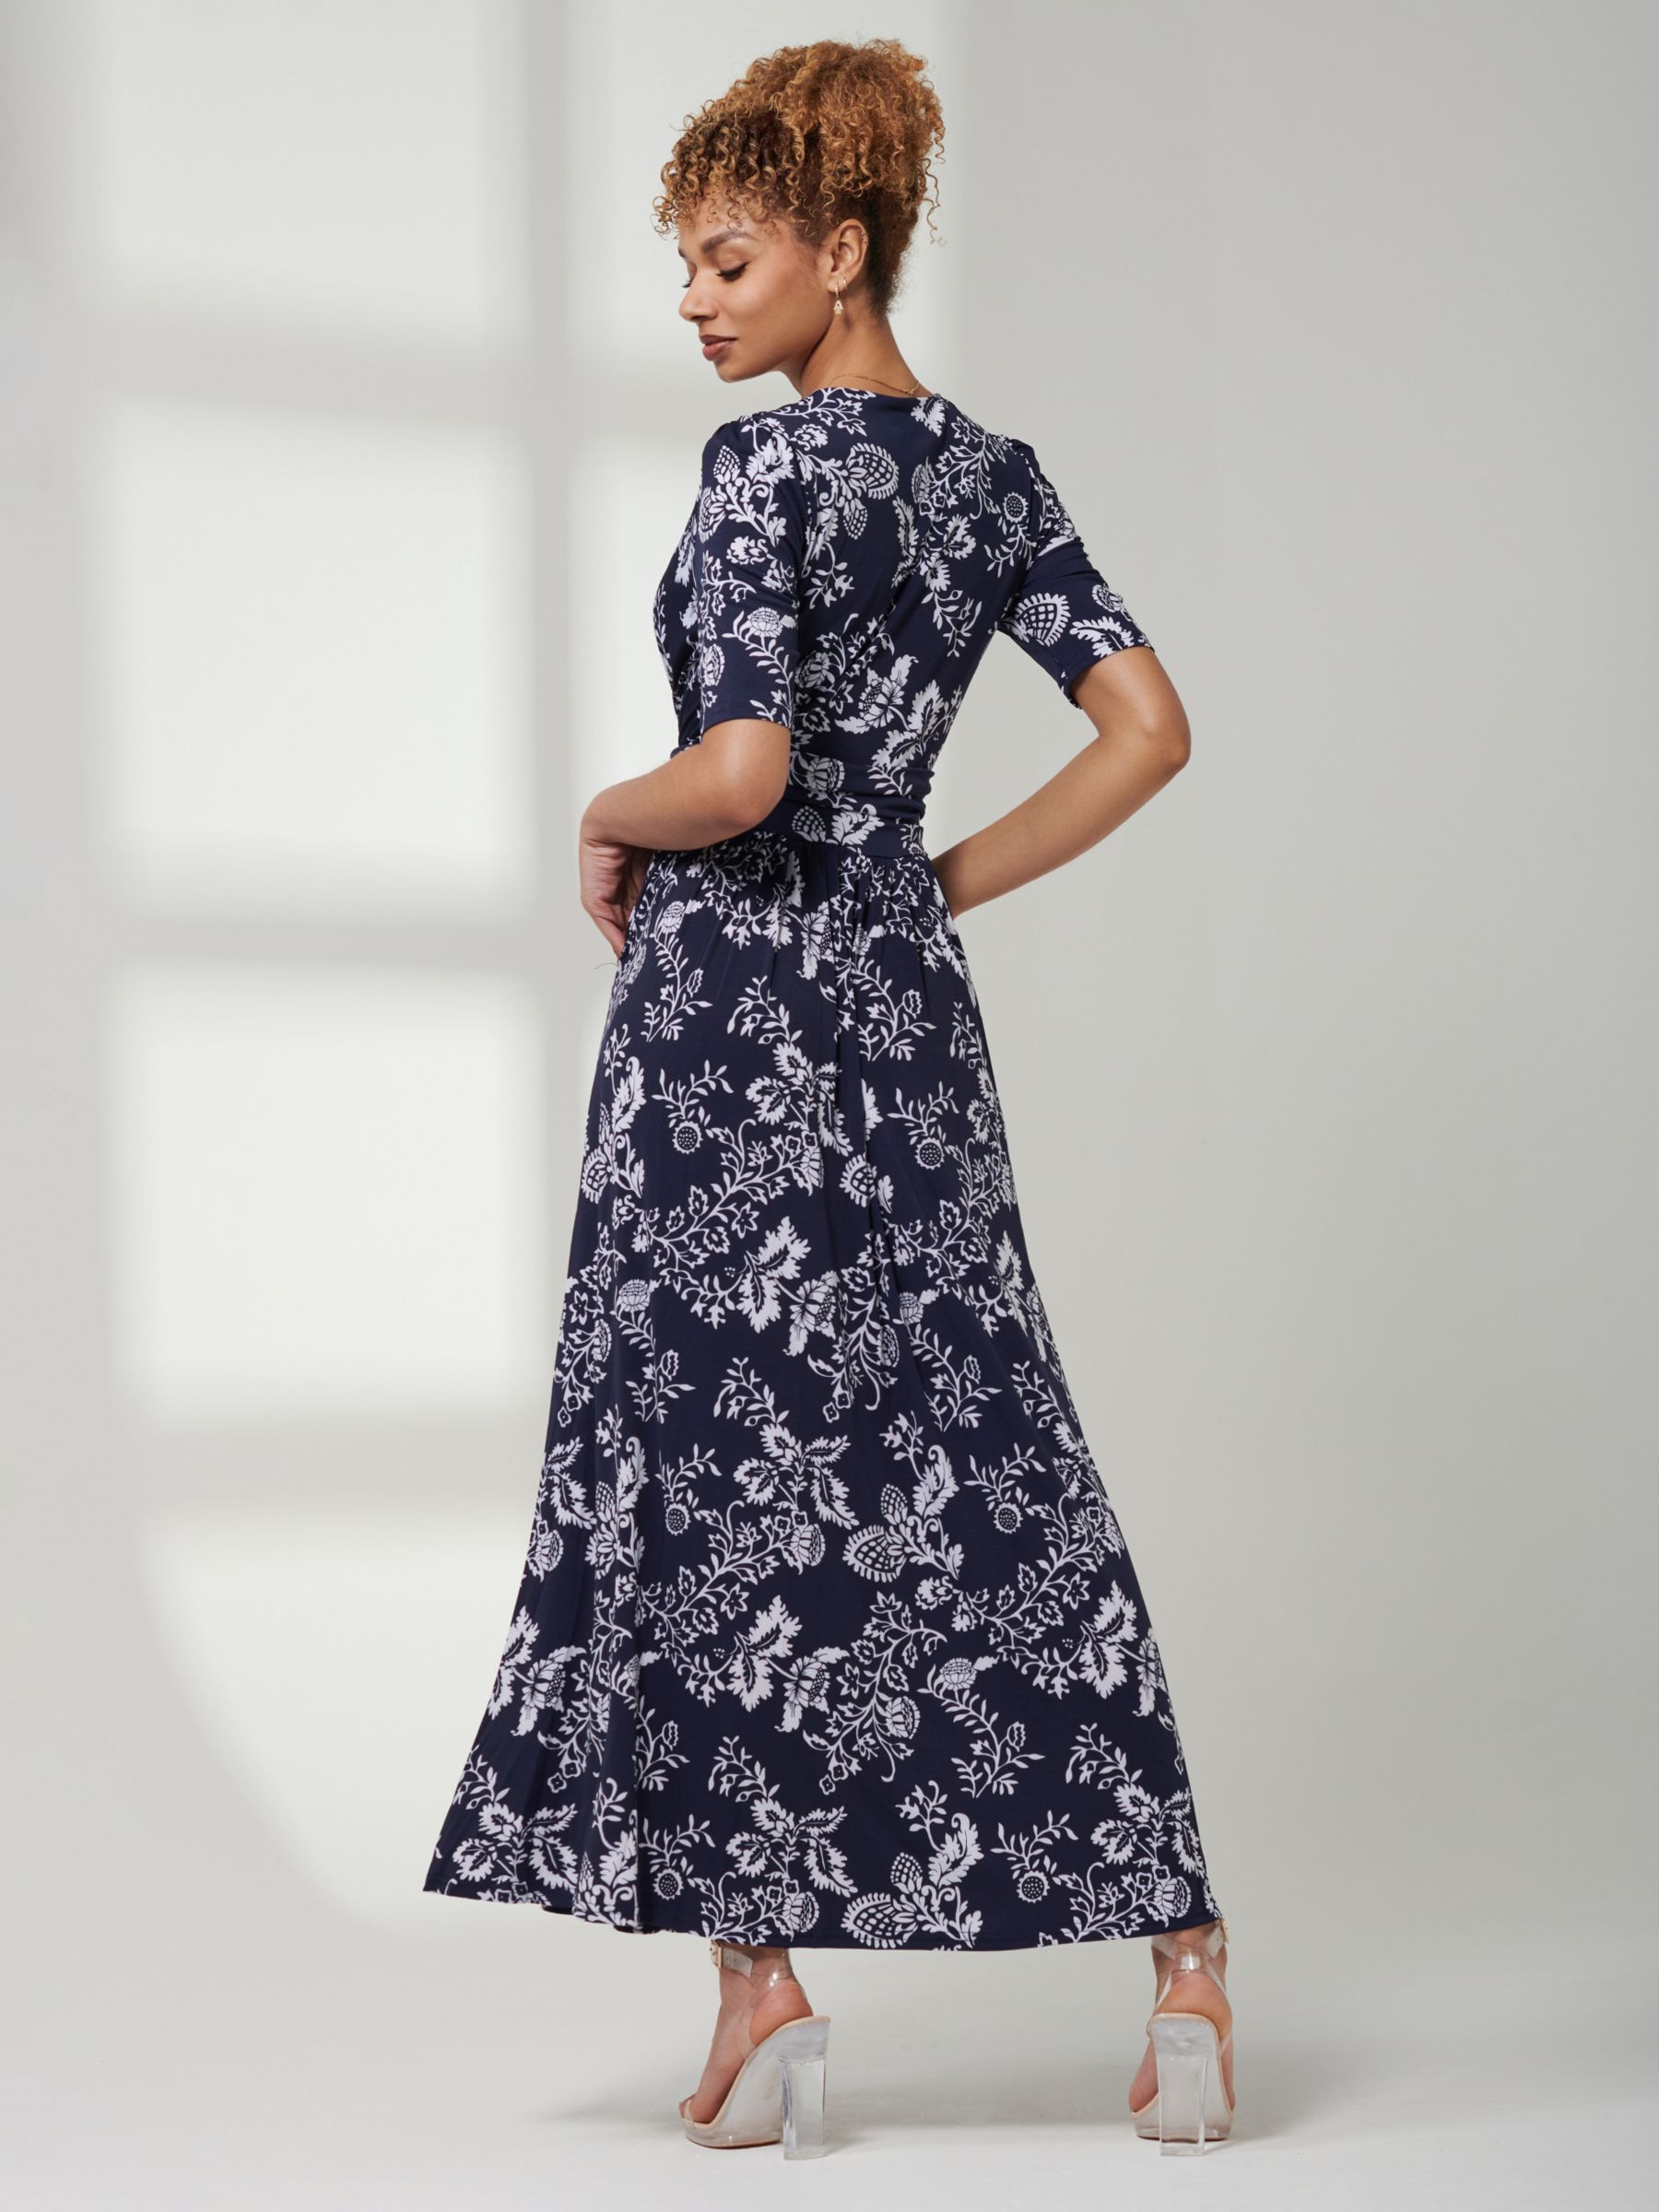 Buy Jolie Moi Pleat Floral Maxi Jersey Dress, Navy/White Online at johnlewis.com